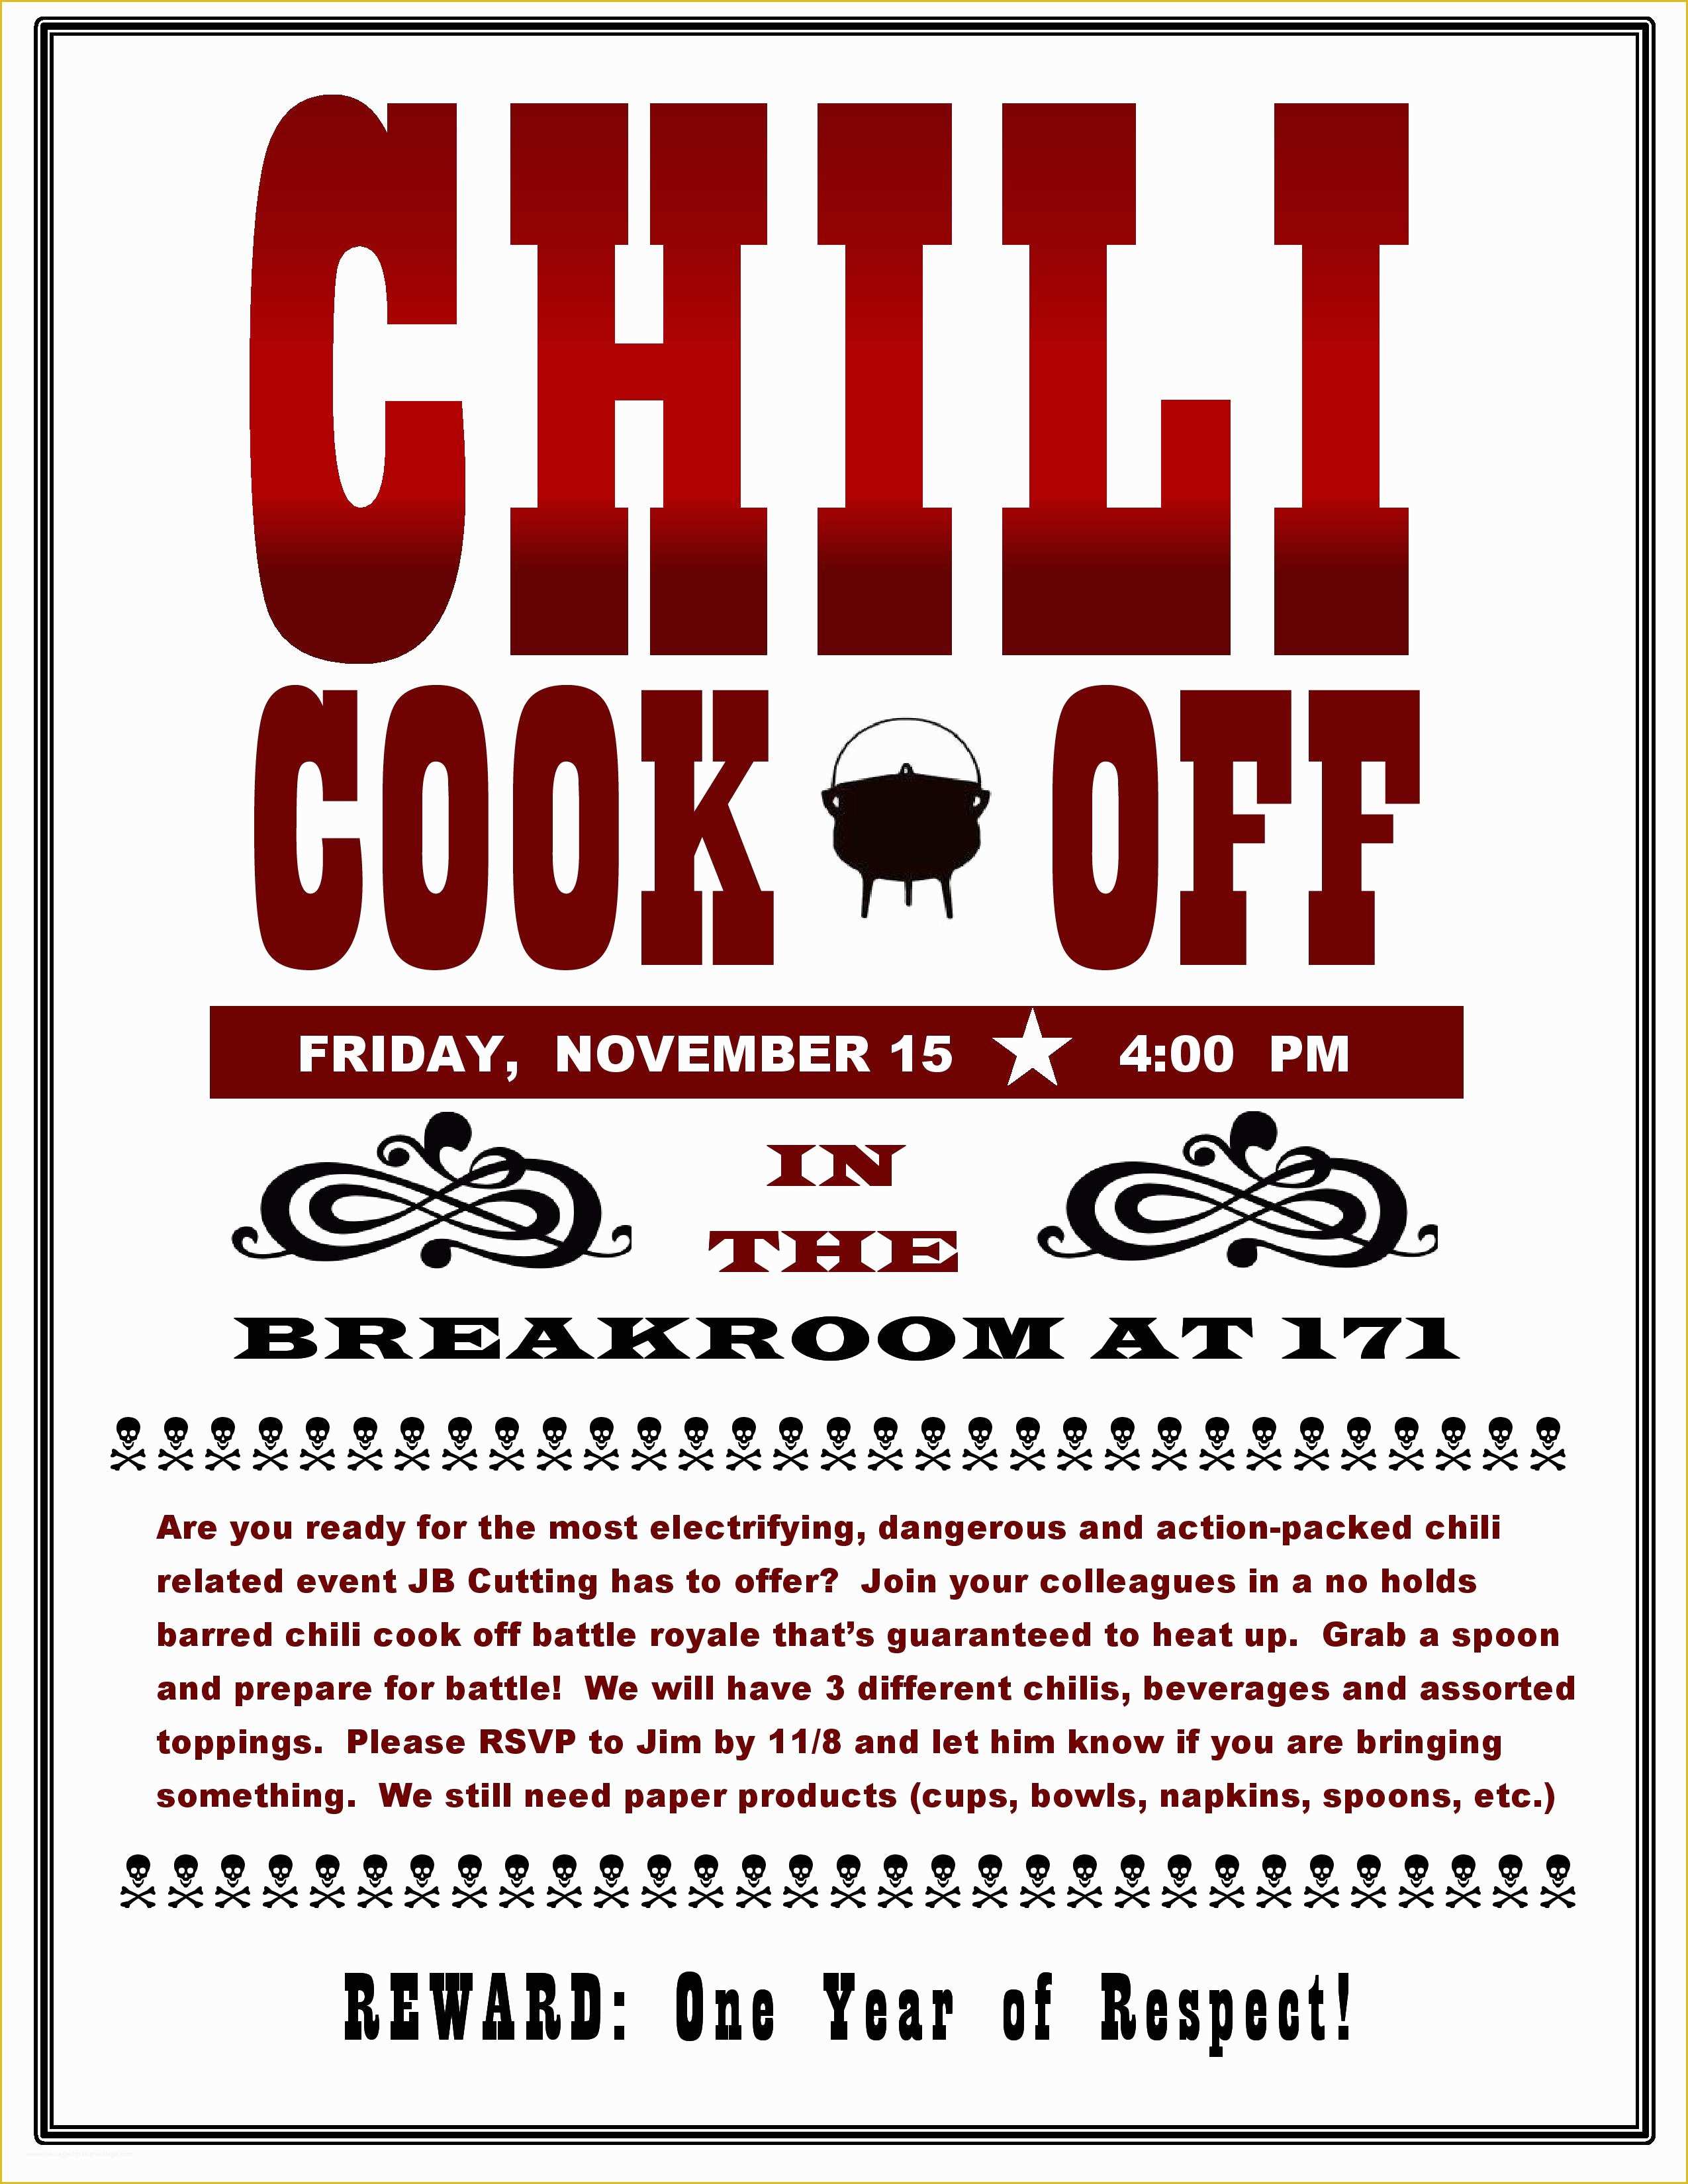 Chili Cook Off Flyer Template Free Of Jb Cutting Chili Cook F 2013 Jb Cutting